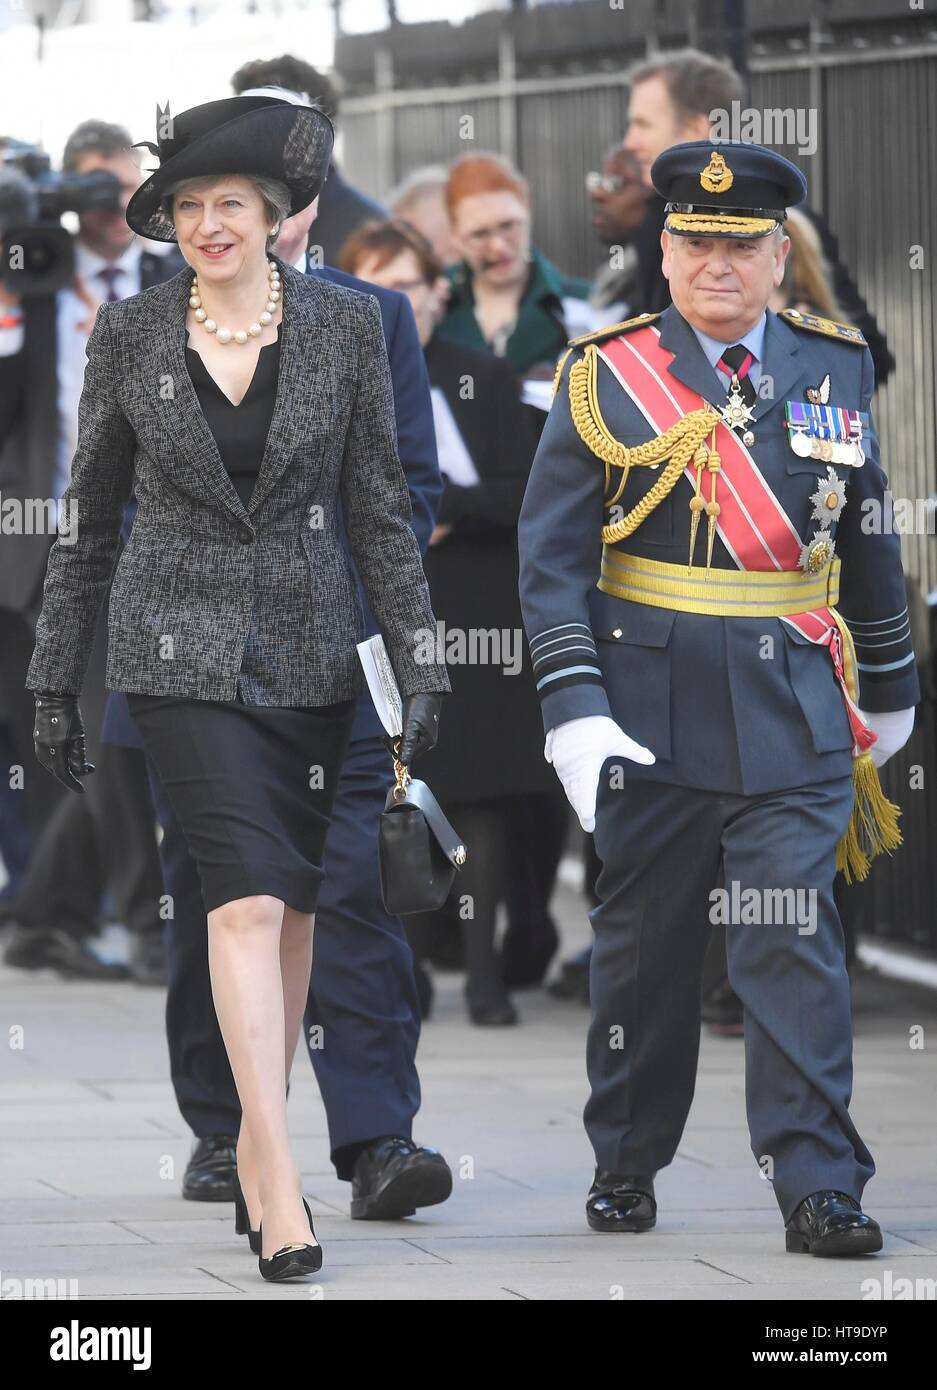 Prime Minister Theresa May after the unveiling of a new Iraq and Afghanistan memorial by Paul Day at Victoria Embankment Gardens in London, honouring the Armed Forces and civilians who served their country during the Gulf War and conflicts in Iraq and Afghanistan. Stock Photo